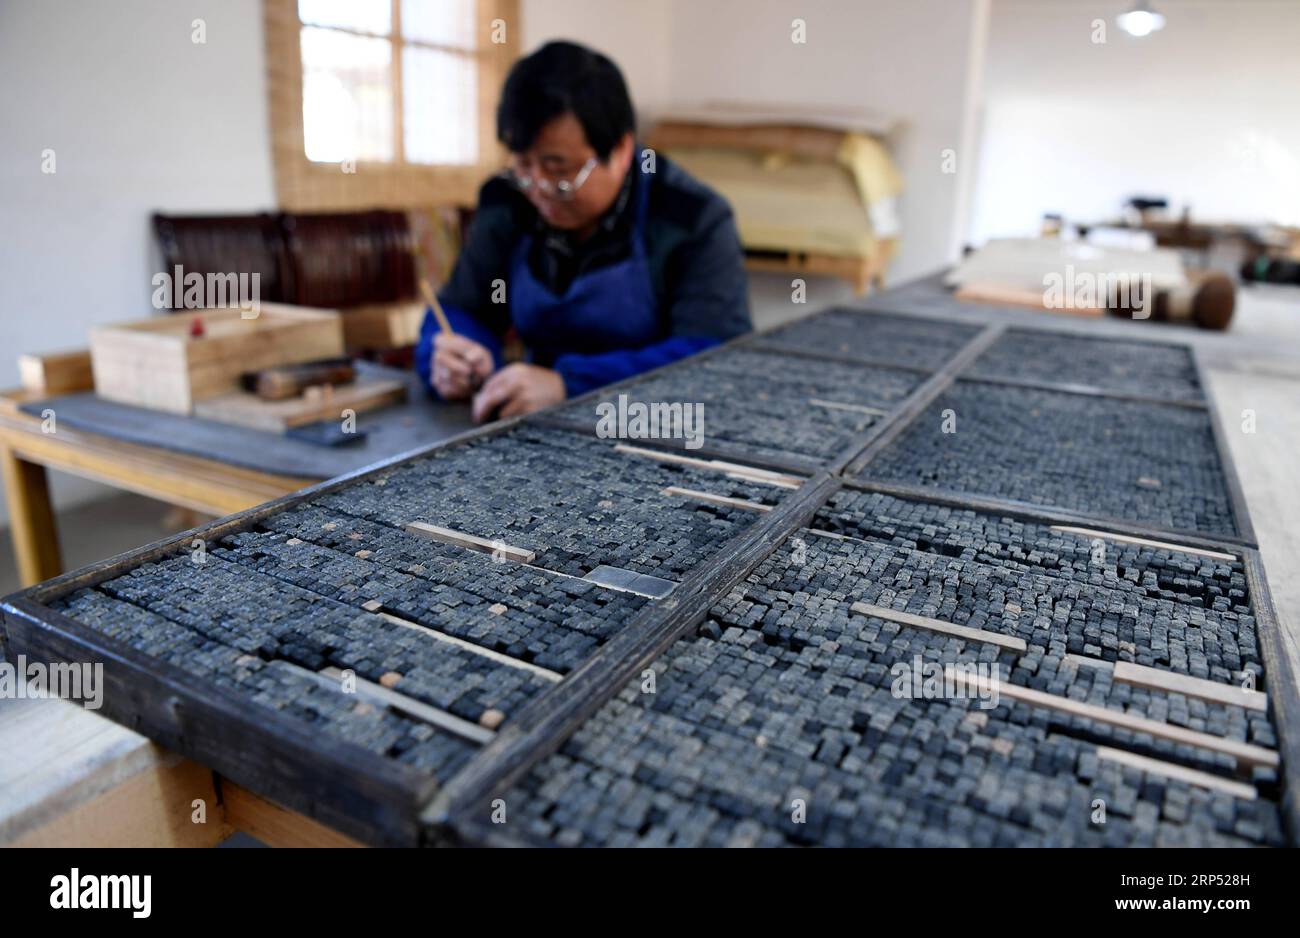 (181124) -- JINGXIAN, Nov. 24, 2018 -- Lei Shitai works in Chanshan Village of Qinxi Town, Jingxian County, in east China s Anhui Province, Nov. 23, 2018. Lei, 52, born in neighboring Jiangxi Province, started his career as a typography printer when he finished his apprenticeship with his uncle who he followed since he was 17. The traditional printing method witnessed an increasingly hard time in the recent years as a livelihood. It was in 2017 when he decided to move to Chanshan at the invitation of Kai Yuanhong, a local cabinet maker, to cooperate in a broader way. Lei is now working with th Stock Photo